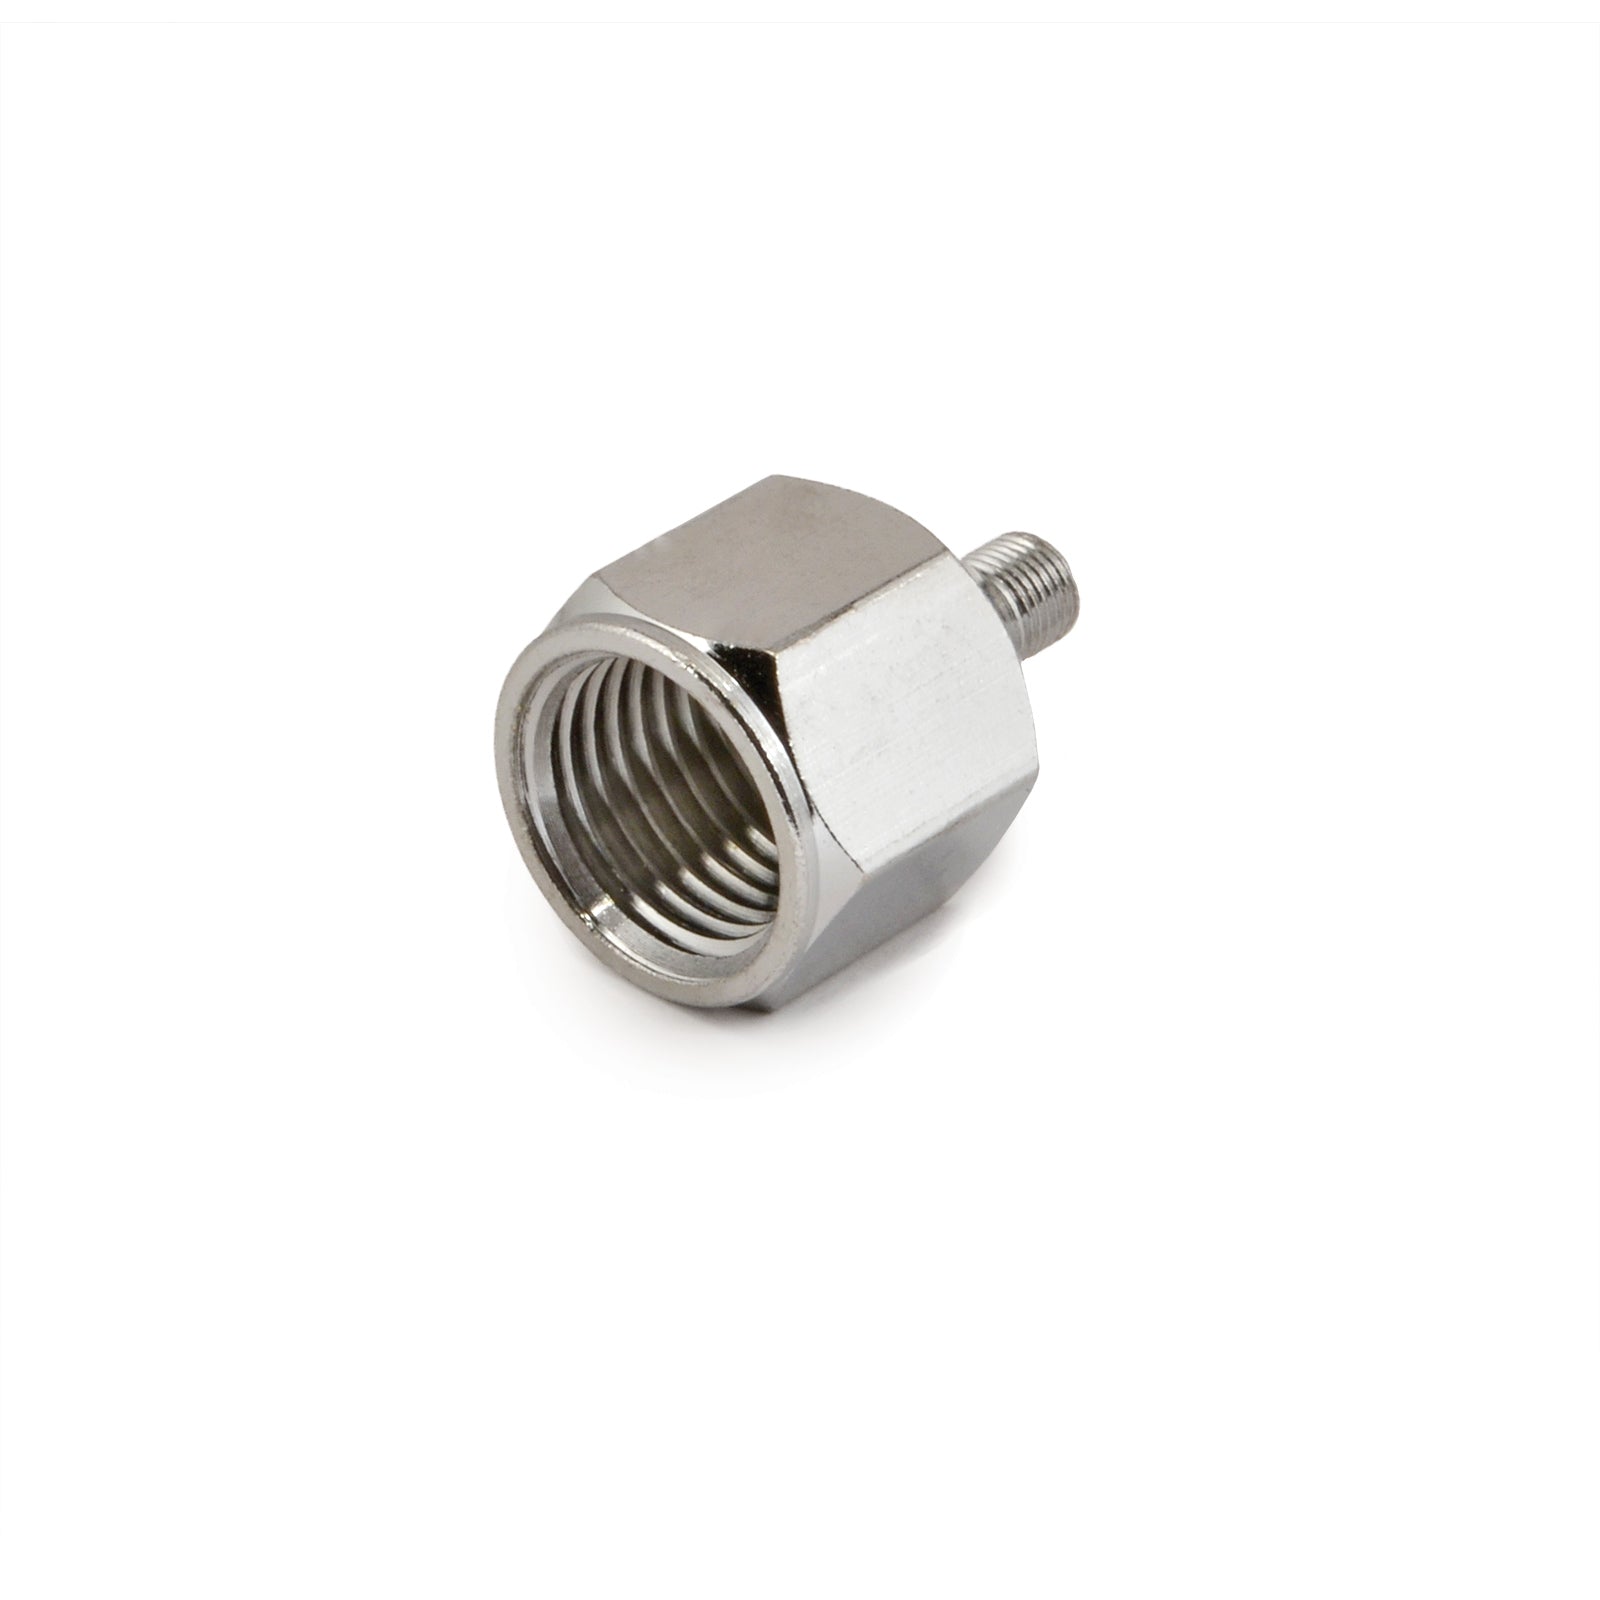 Air Line Adapter for Airbrushes, M5x0.5 BSP Male to 1/4 Inch BSP Female